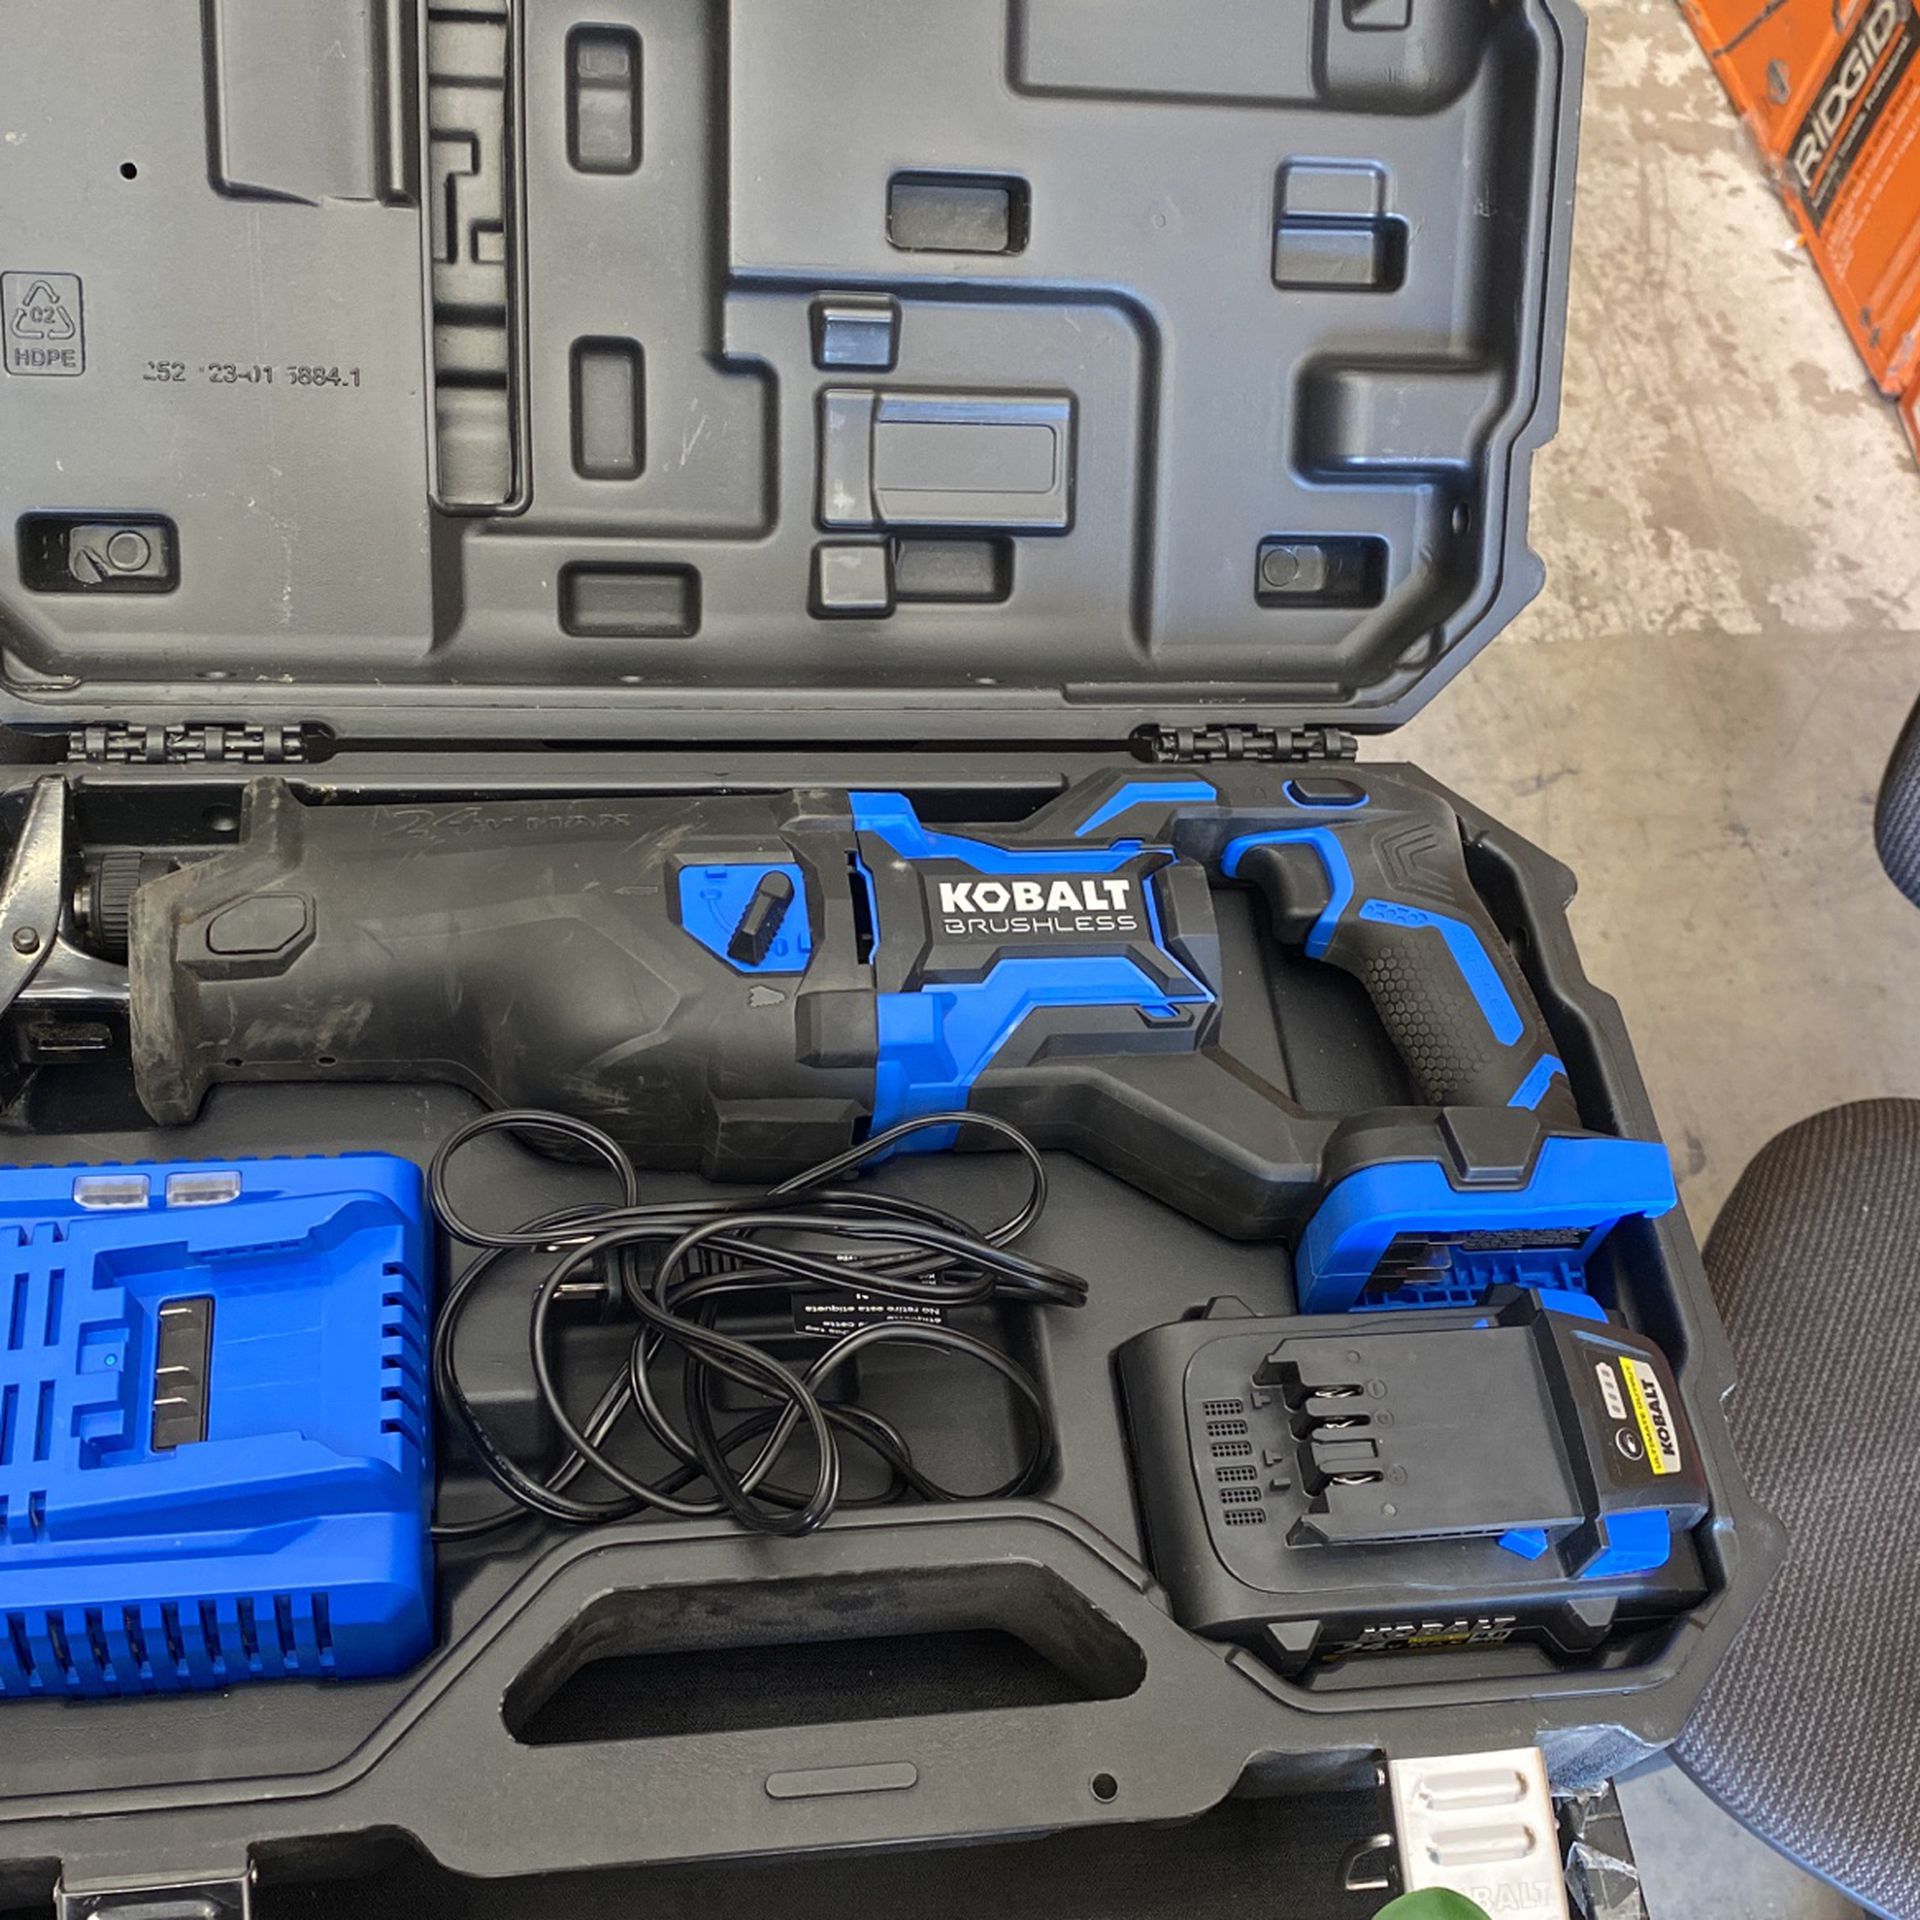 Kobalt XTR 24-volt Max Variable Speed Brushless Cordless Reciprocating Saw (Bare  Tool) Item #1518743 Model #KXRS 124B-03 for Sale in Hesperia, CA OfferUp